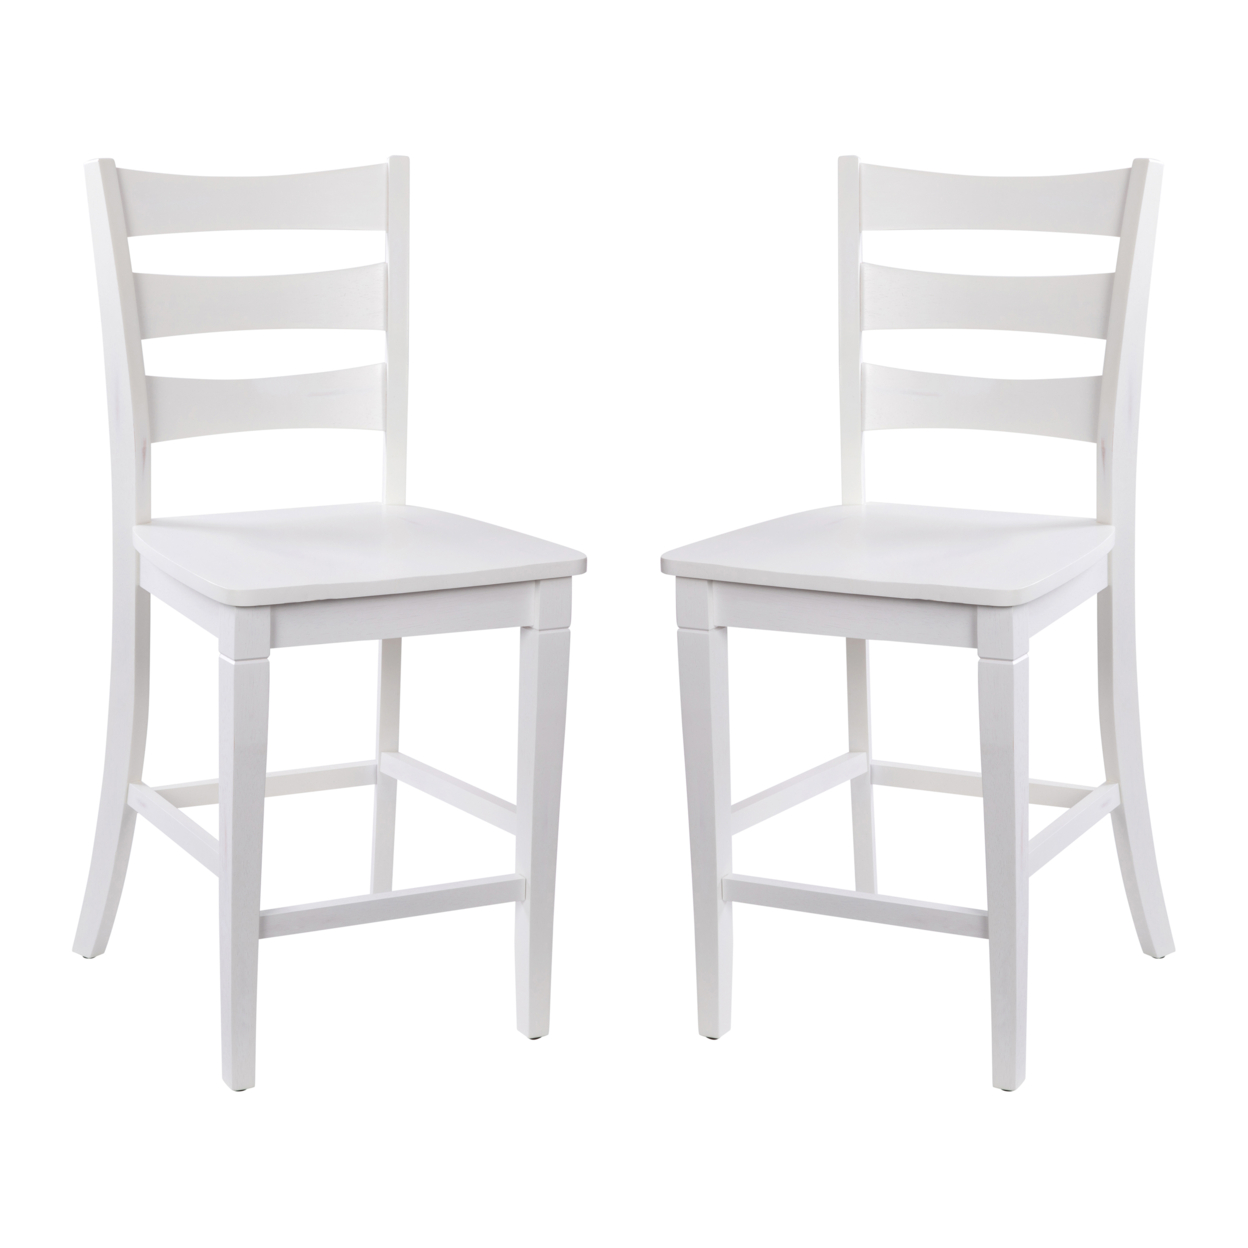 2 Piece Counter Stool, Slatted Design Back, White